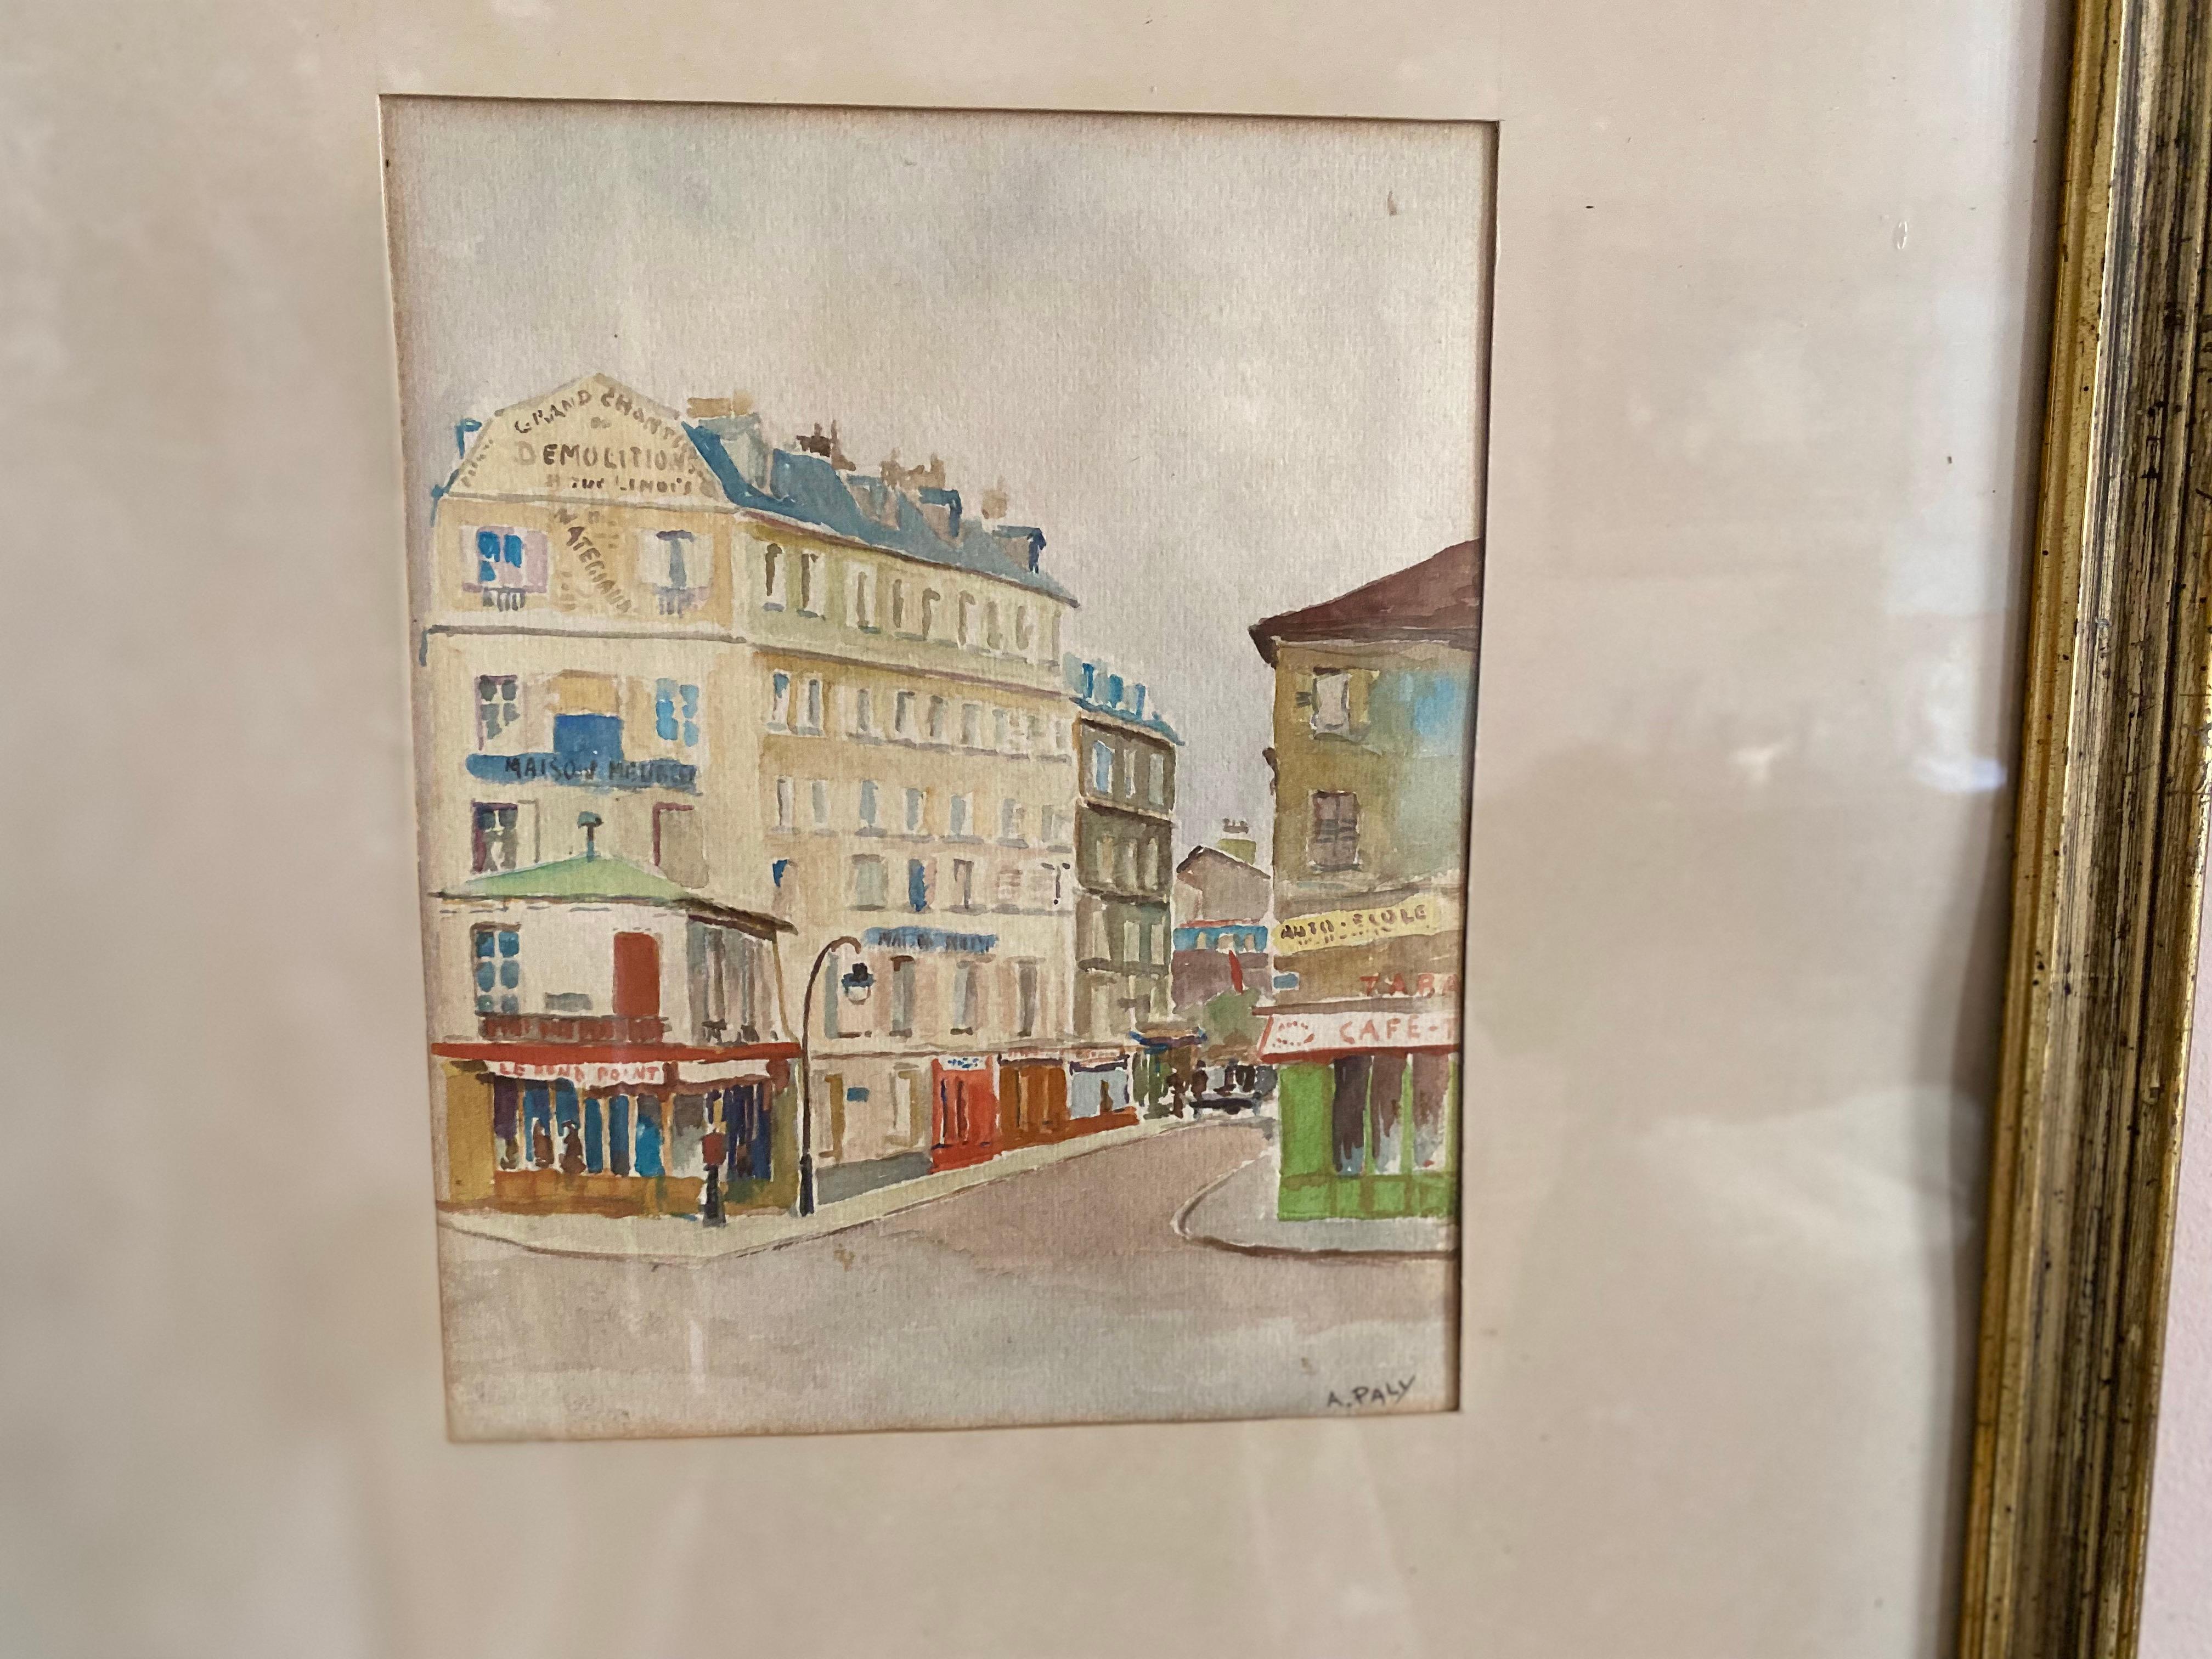 Watercolor of a Paris street scene with a „Berliner Leiste“ frame by A. Paly For Sale 1